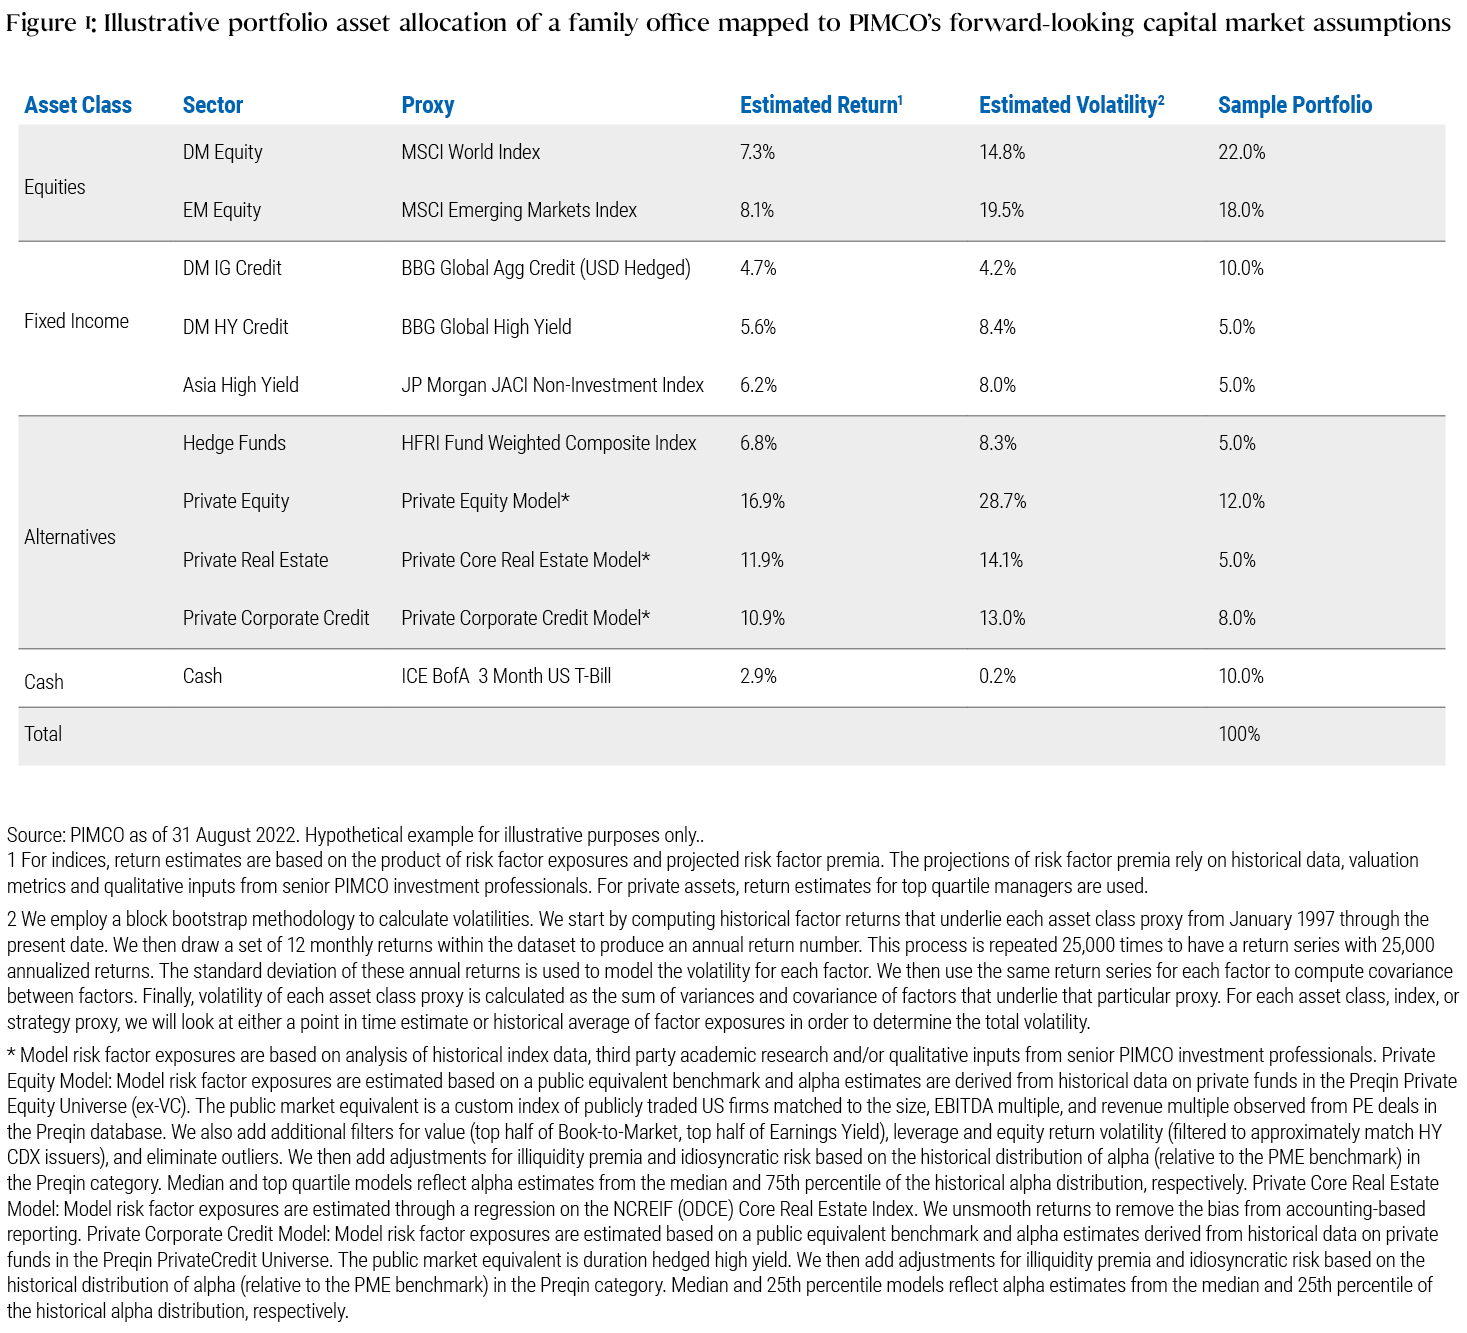 Figure 1: The table shows an illustrative portfolio asset allocation of a family office mapped to PIMCO’s forward-looking capital market assumptions. The asset classes shown are Equity (DM and EM), Fixed Income (DM IG Credit, DM HY Credit and Asia HY), Alternatives (Hedge Funds, Private Equity, Private Real Estate and Private Corporate Credit) and Cash. The table shows estimated returns and volatility for the asset classes and the weighting of each in the sample portfolio.